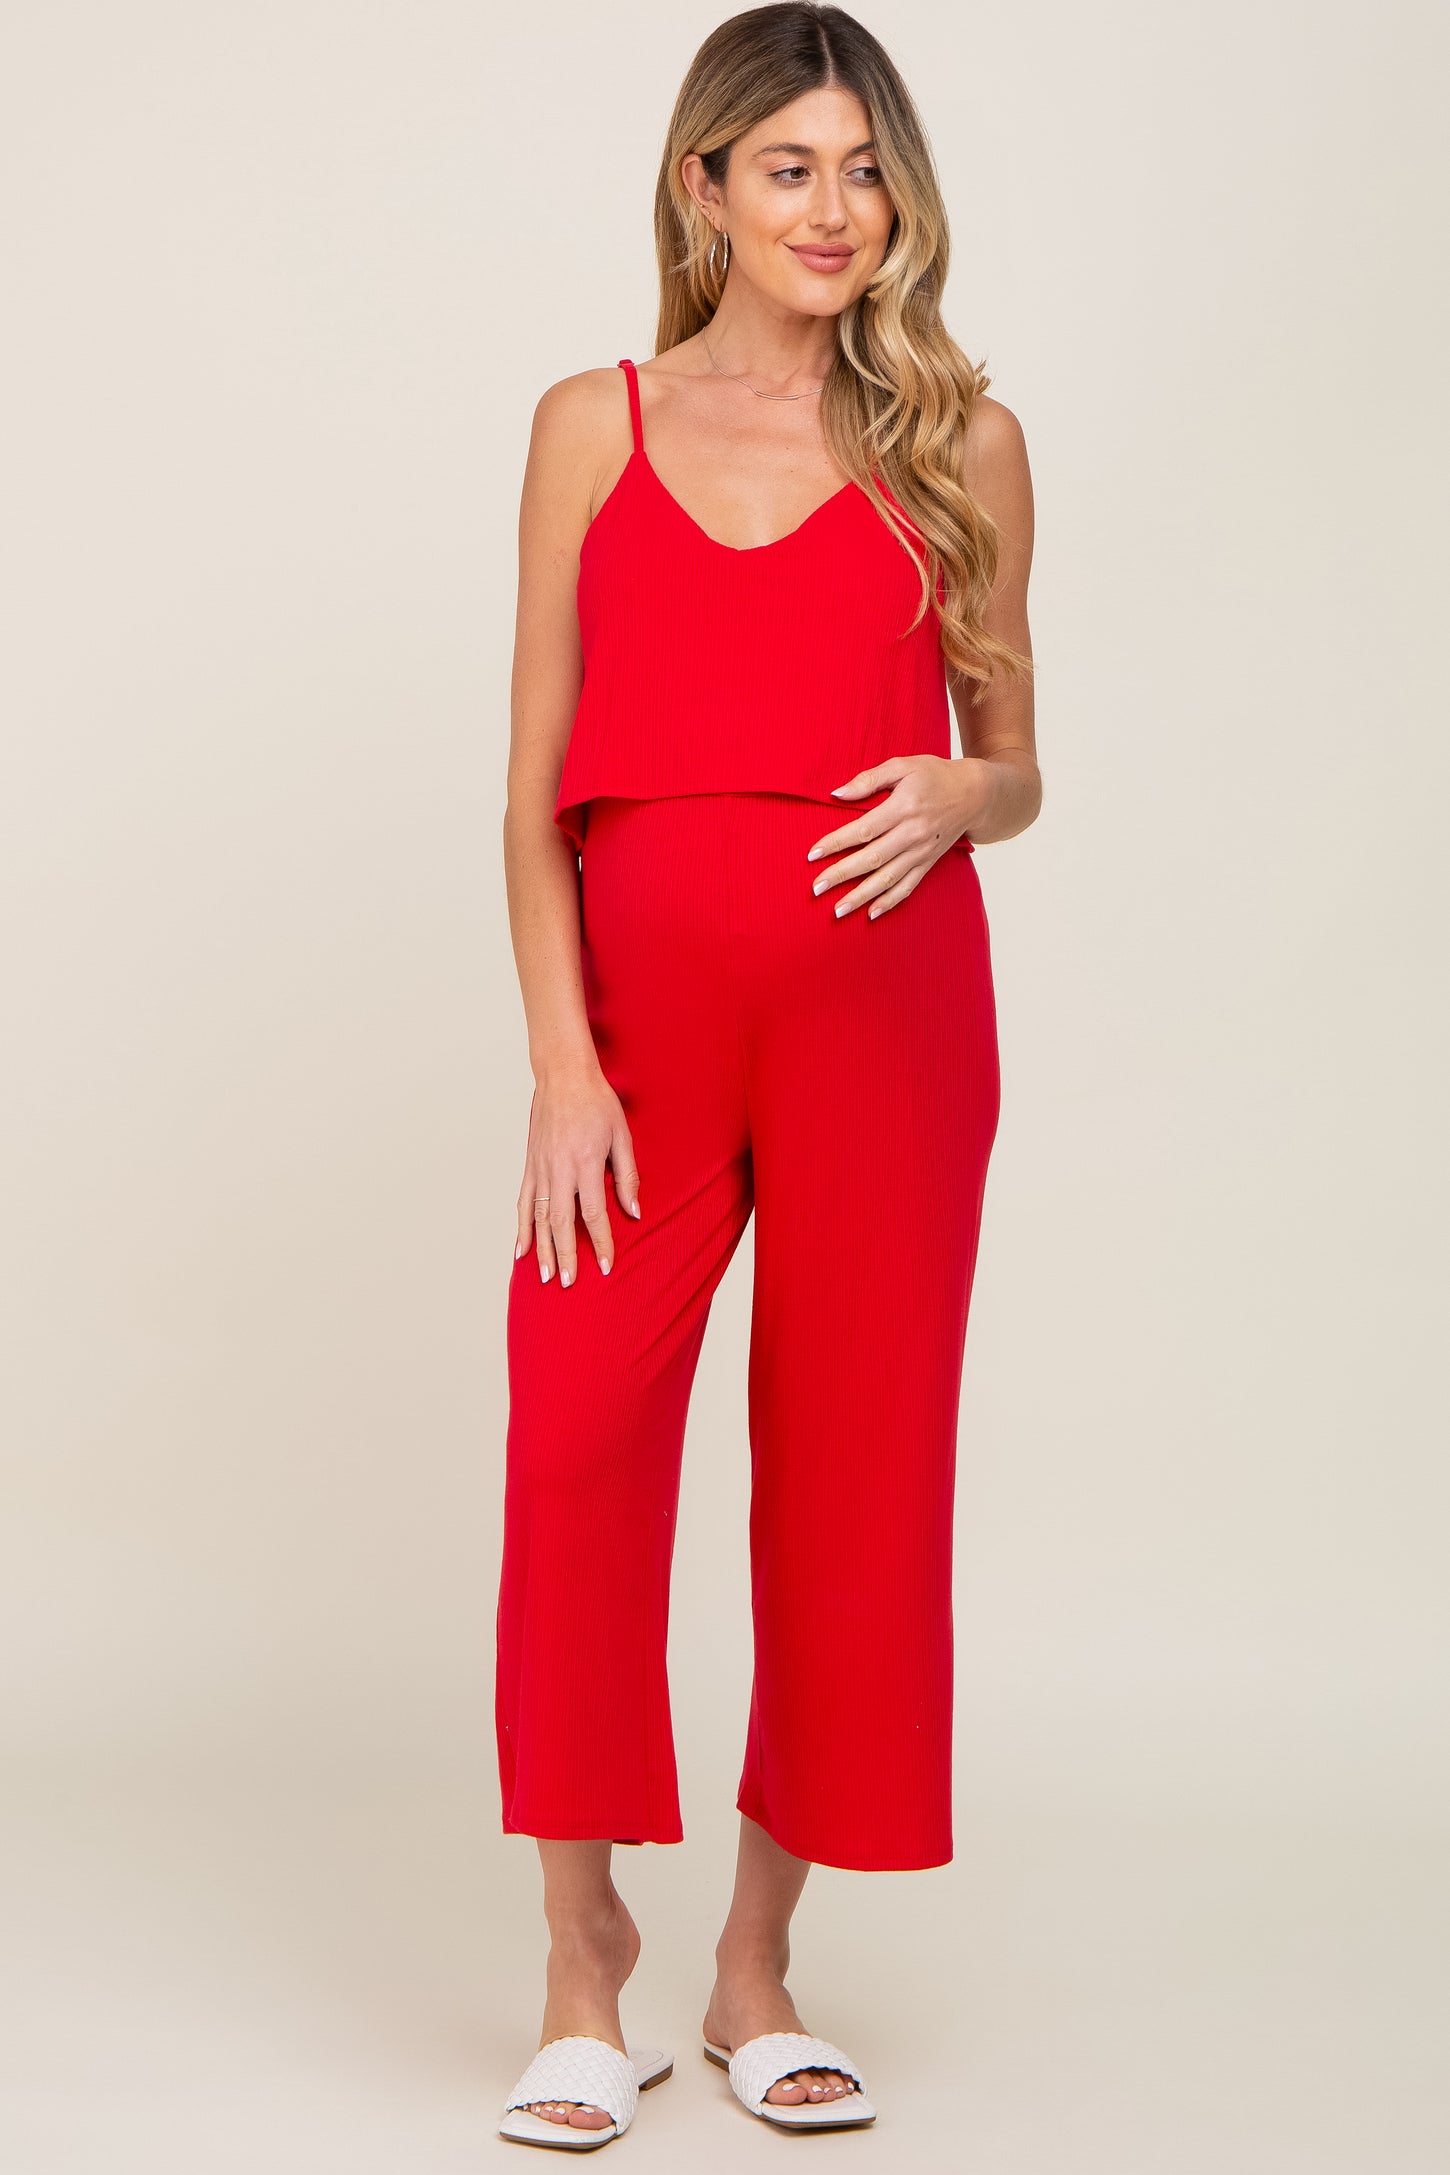 NEW The Nines By Hatch Maternity Overalls Jumpsuit Red Cotton Twill Womens  Sz 2 | eBay